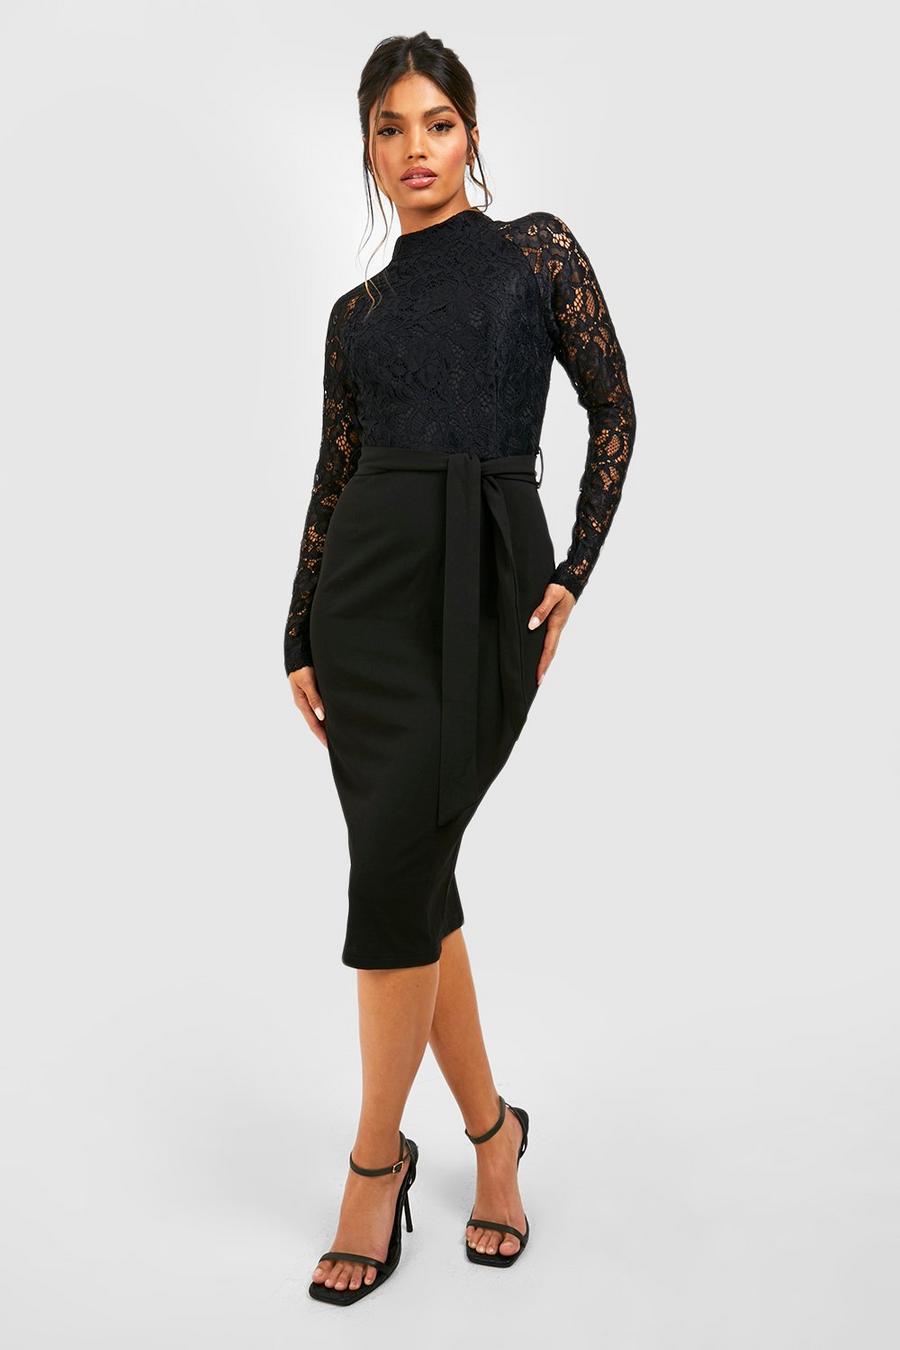 Lace Dresses | Lace Dress With Sleeves | boohoo UK